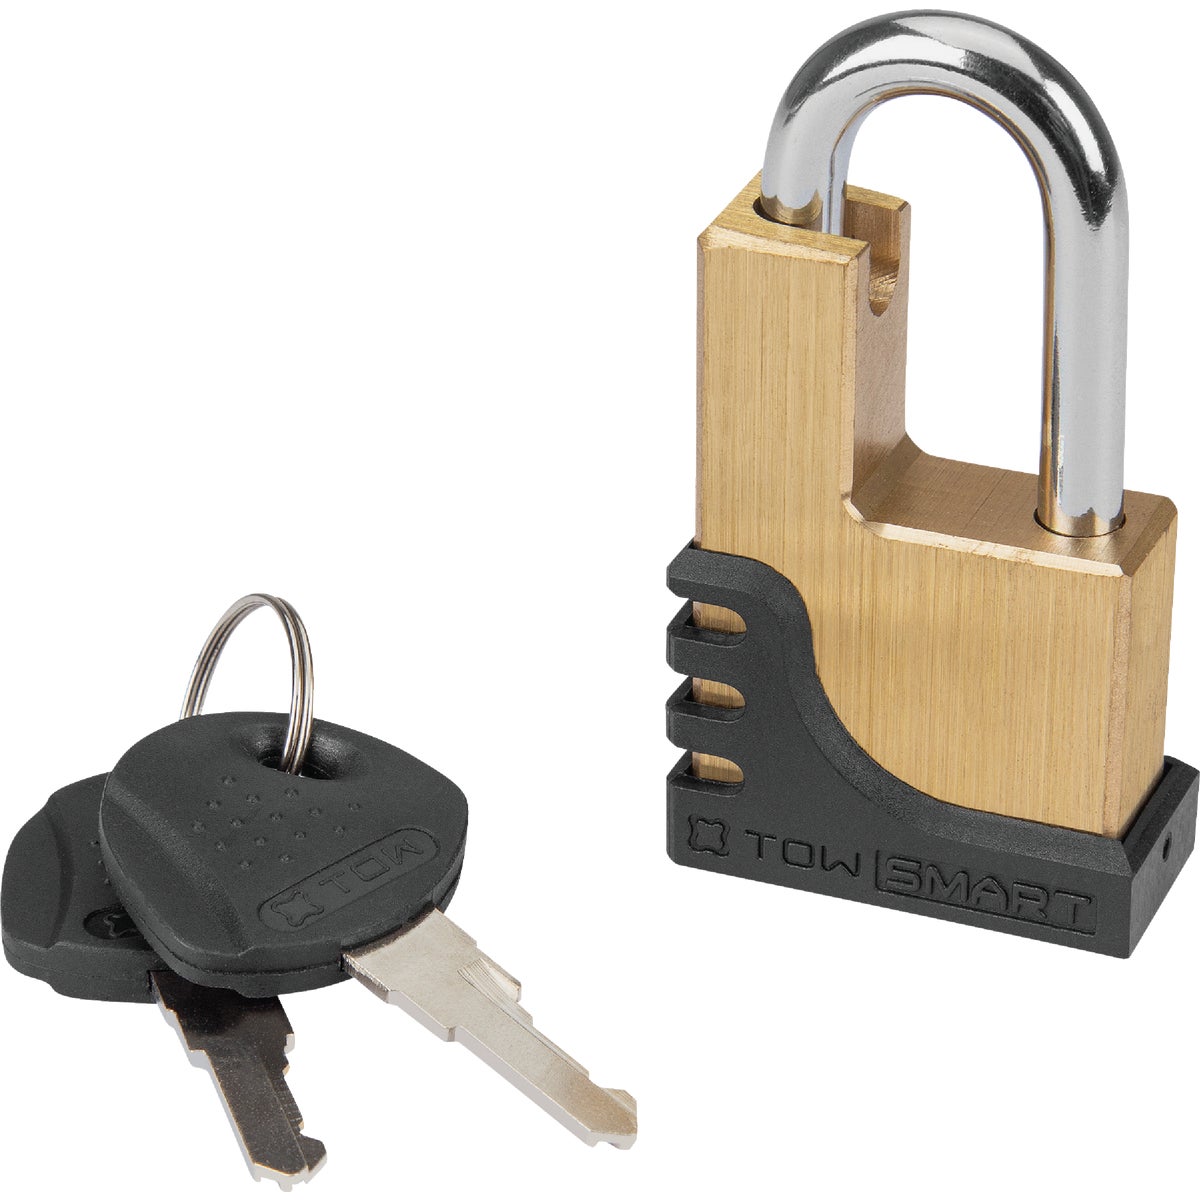 Item 582905, The Brass Coupler Lock protects your boats, campers, trailers, equipment, 